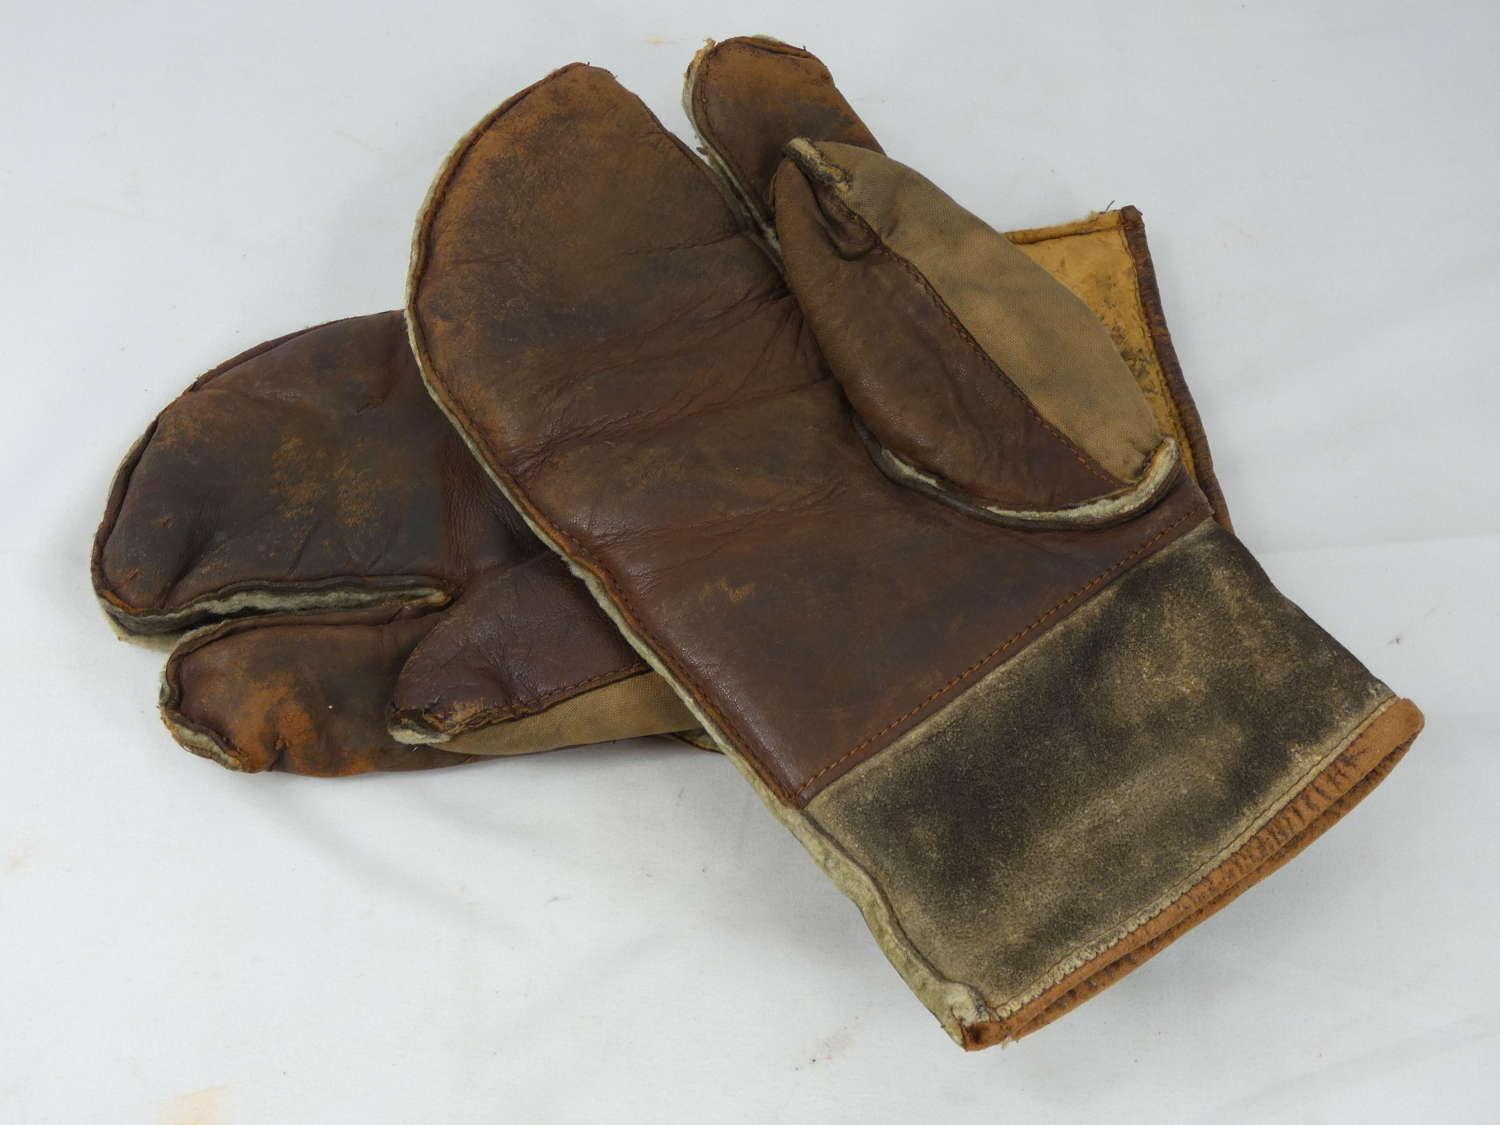 WW2 British Military Leather And Canvas Mittens With Trigger Finger